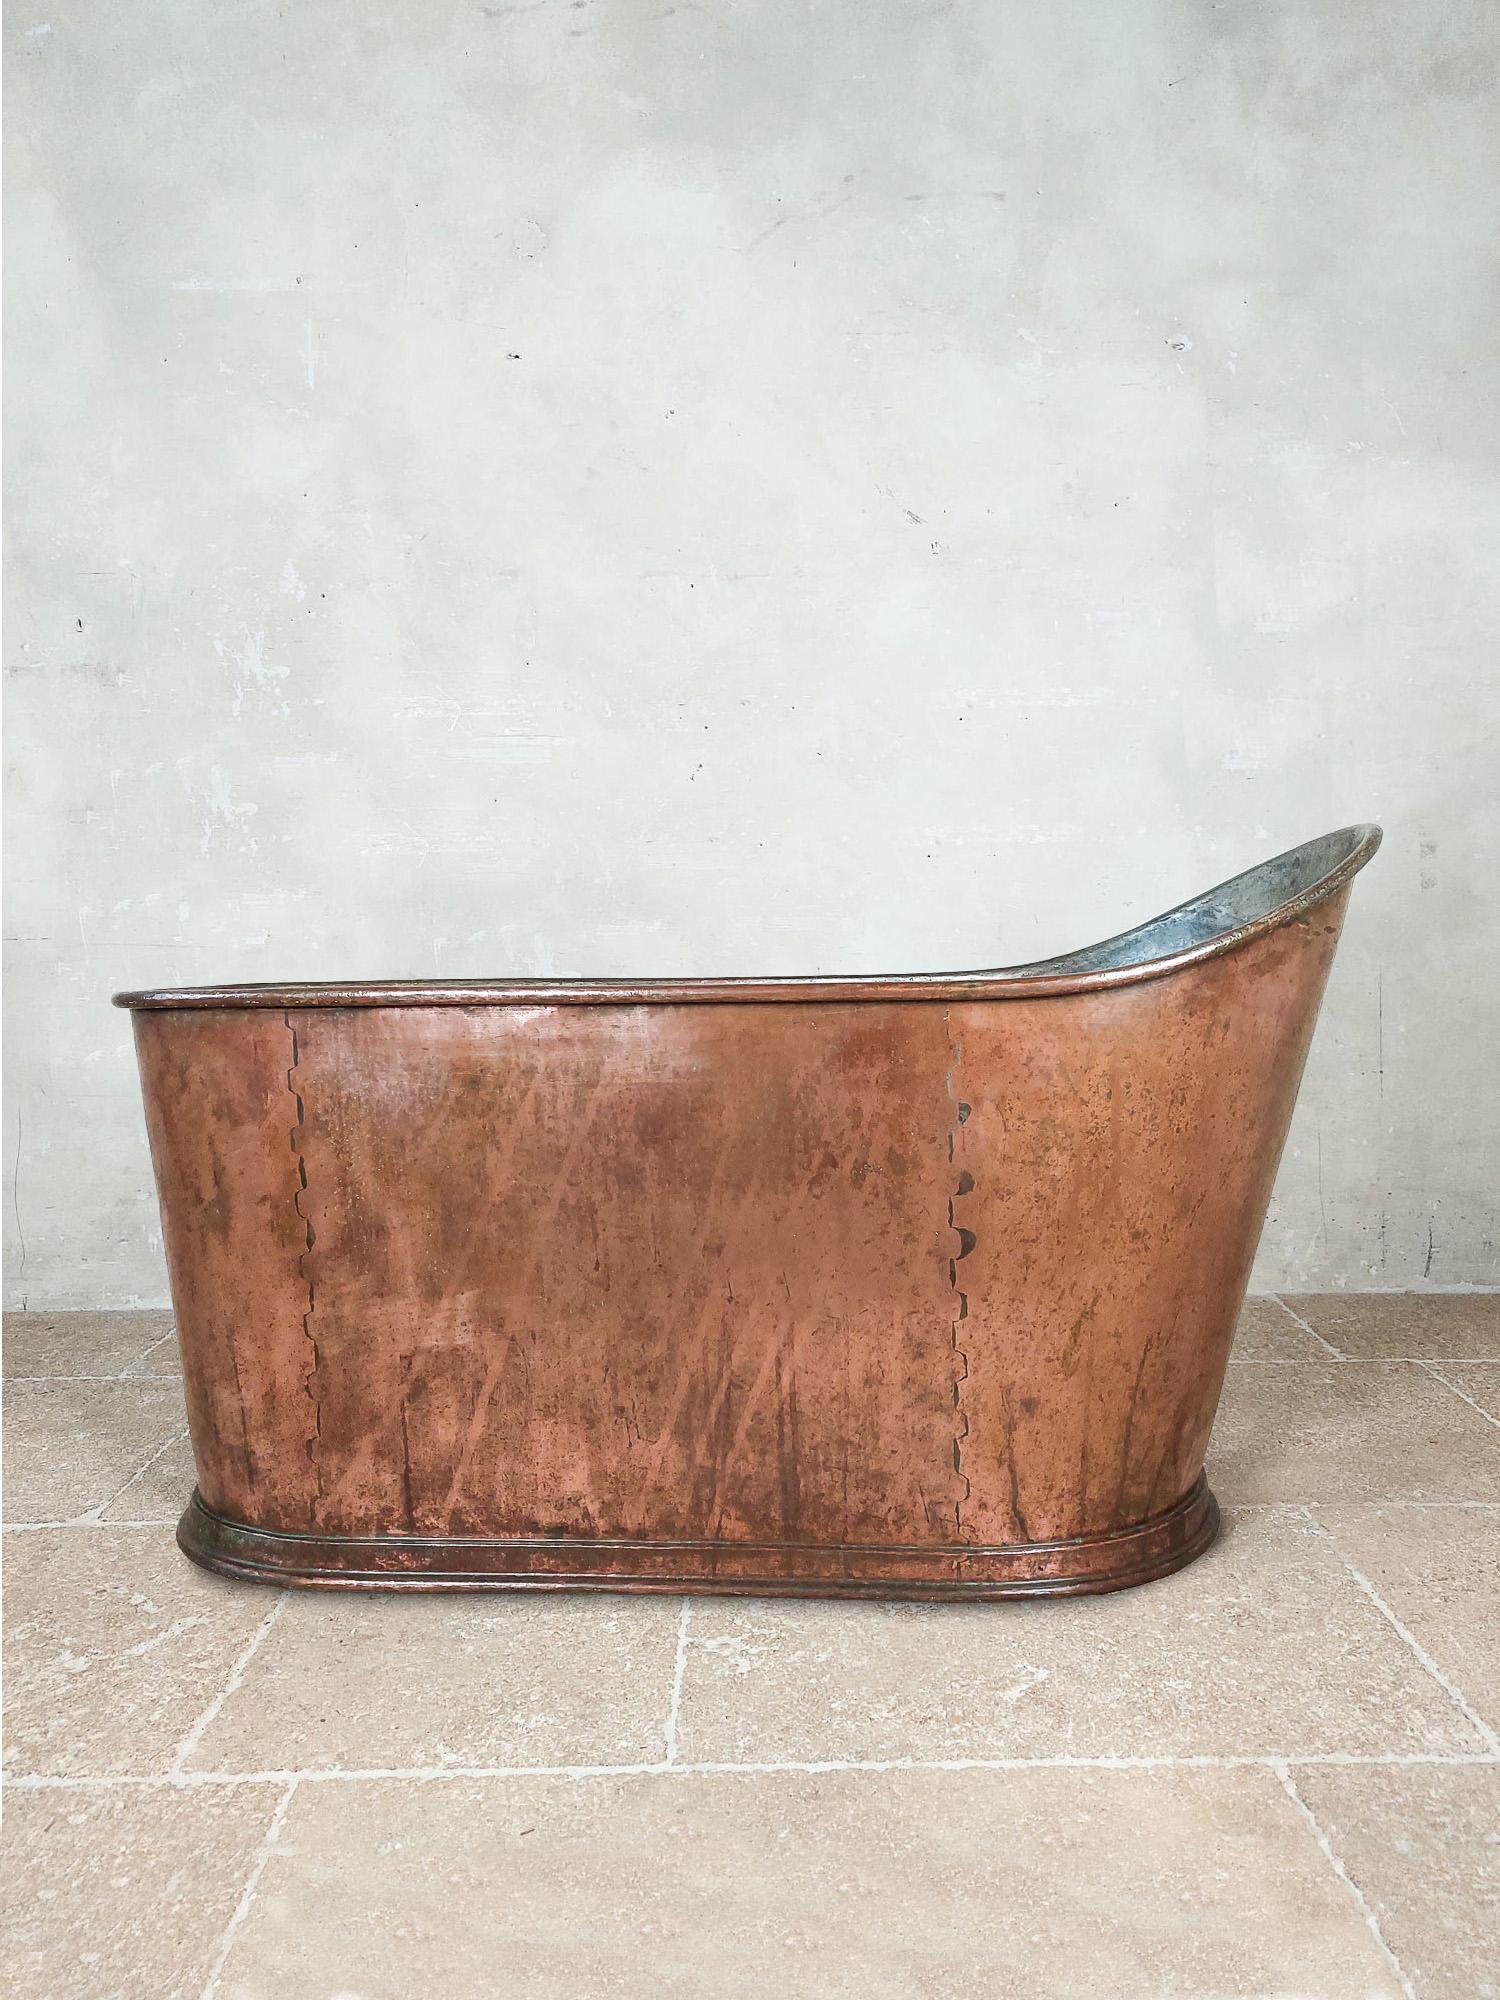 Beautiful early 19th century (around 1800) copper bathtub. Made in France in the Empire style. This is an Asymmetrical bathtub that you use while sitting, which is why this bathtub is quite high.

length 134 cm x width 44-63.5 cm x height 58-75 cm.